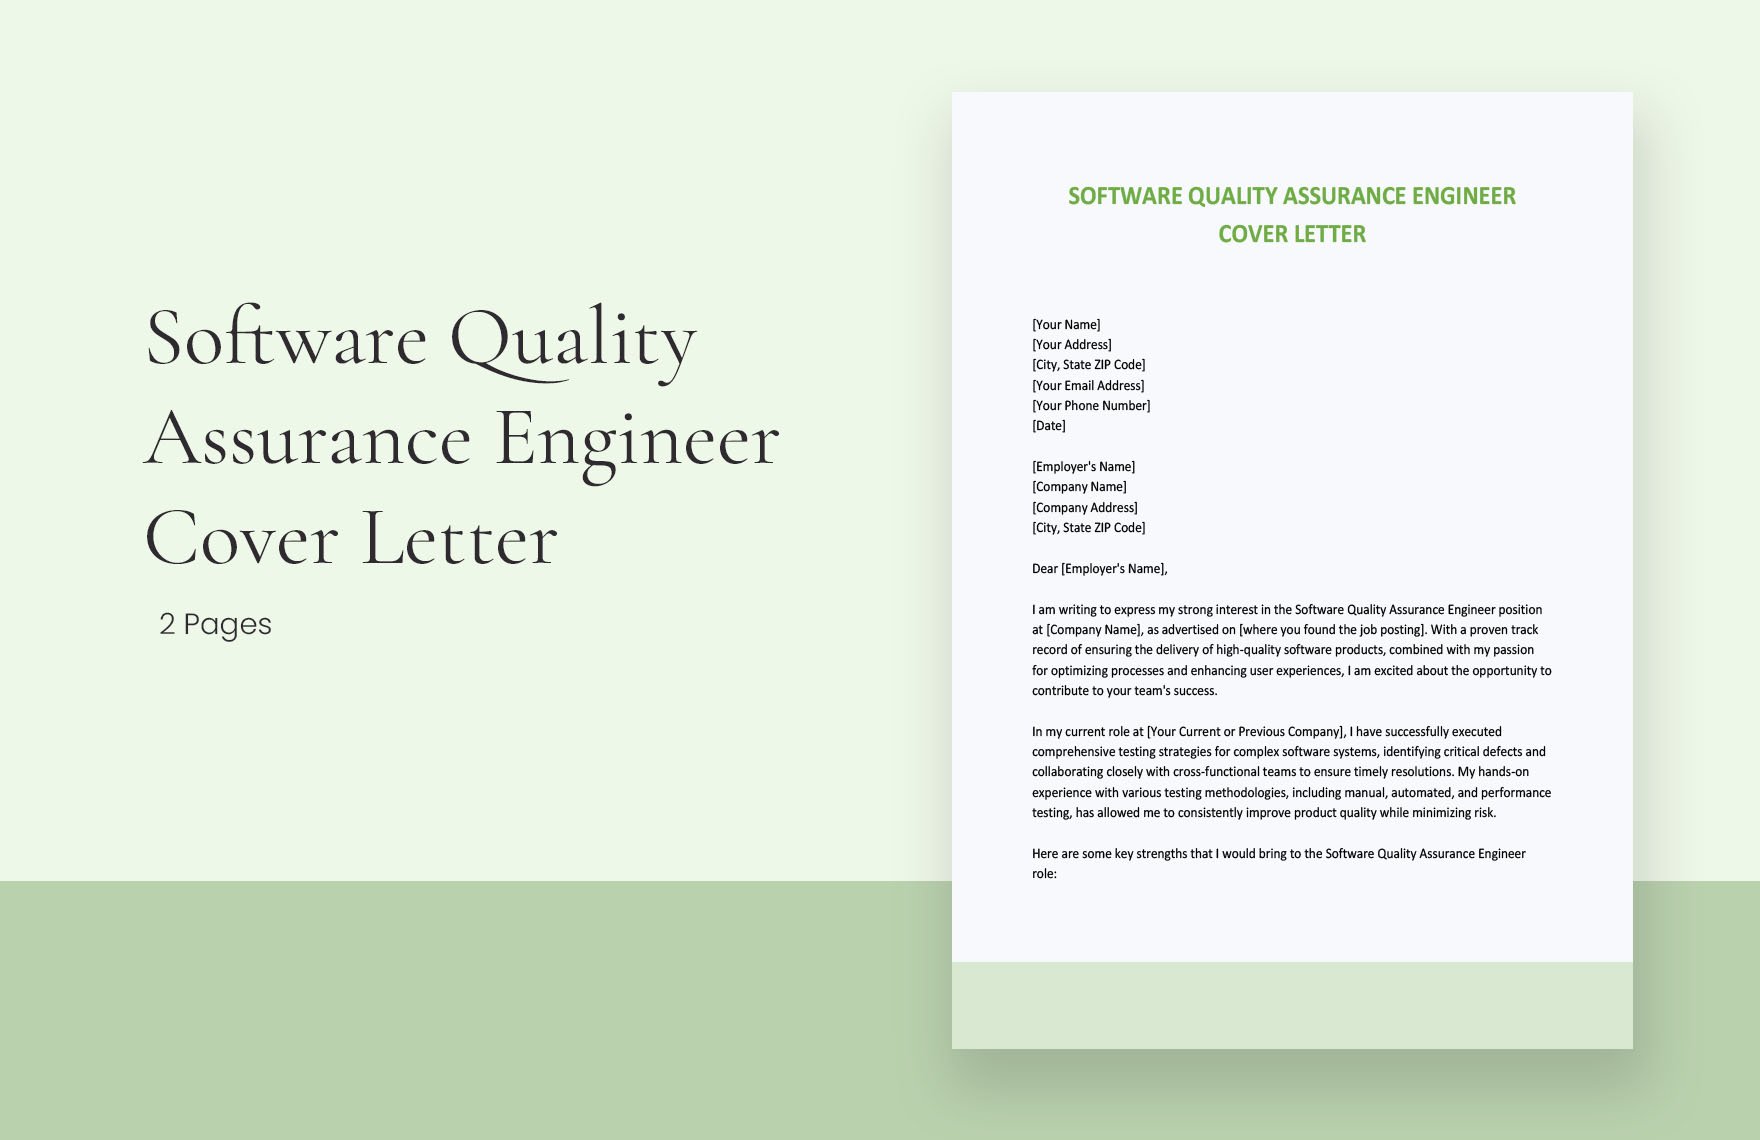 Software Quality Assurance Engineer Cover Letter